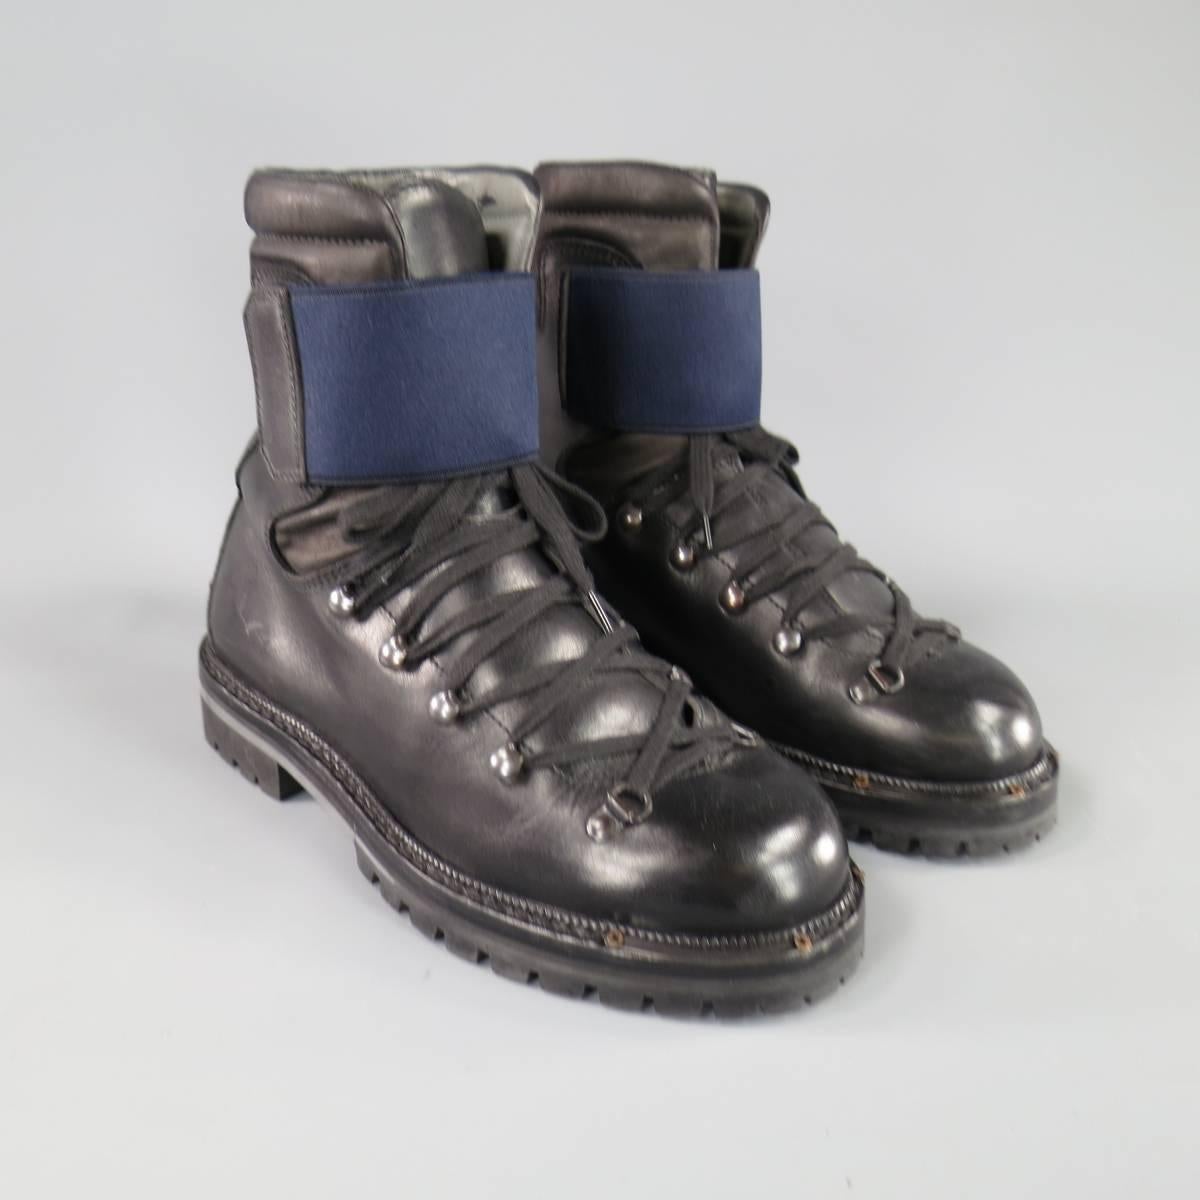 LANVIN Size 8 Black Leather Navy Strap Tall Mountain Boots 1